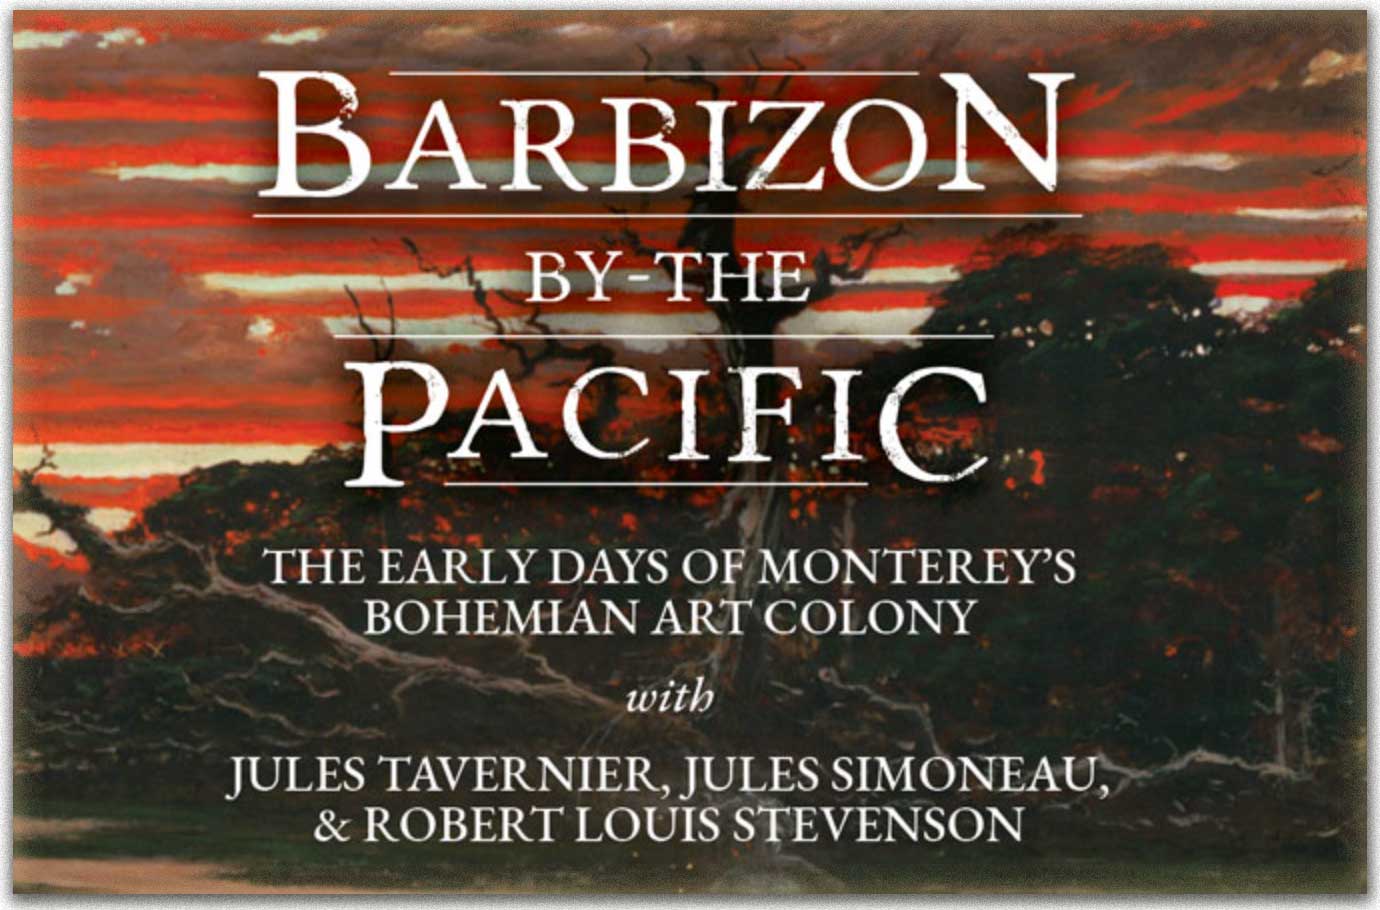 NEW BOOK: Barbizon by the Pacific